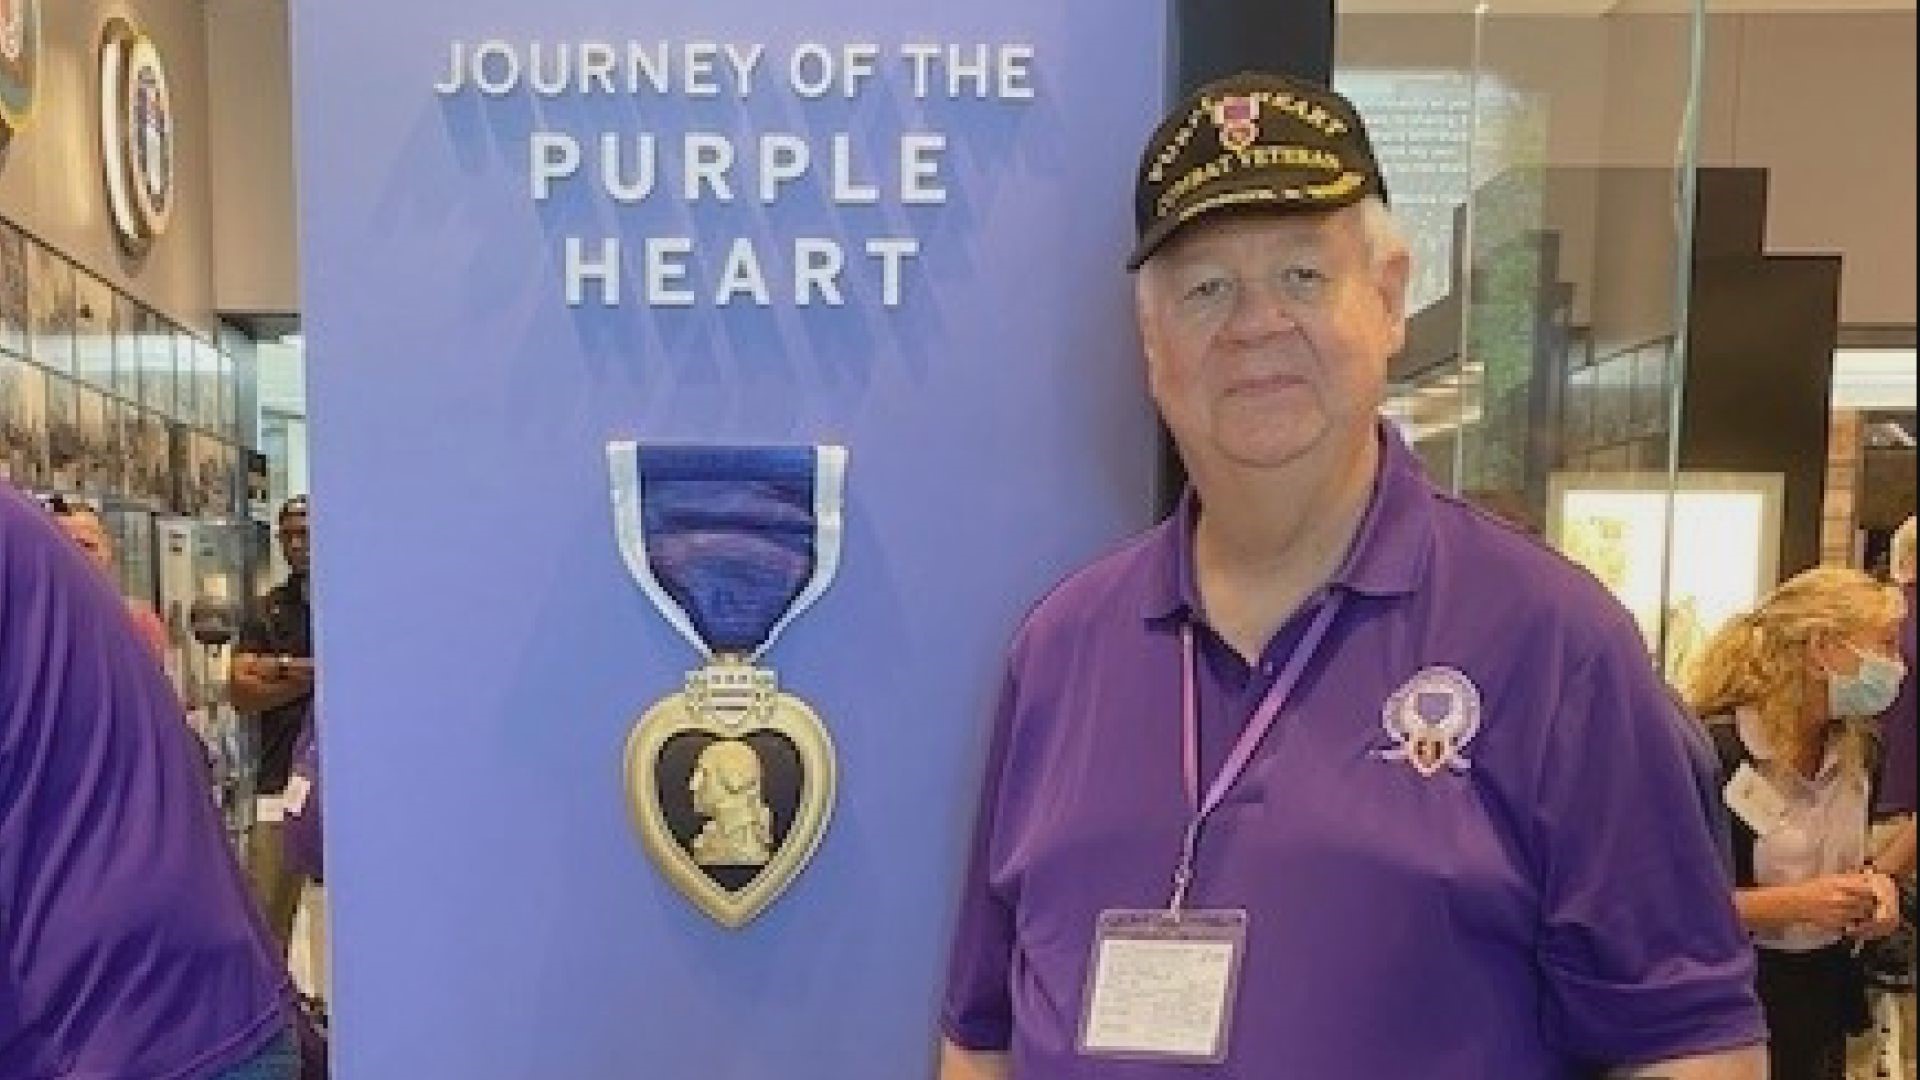 They called him "Big Band Aid" in Vietnam. The senior combat medic was shot while aiding the wounded. Now he continues to fight for veterans.